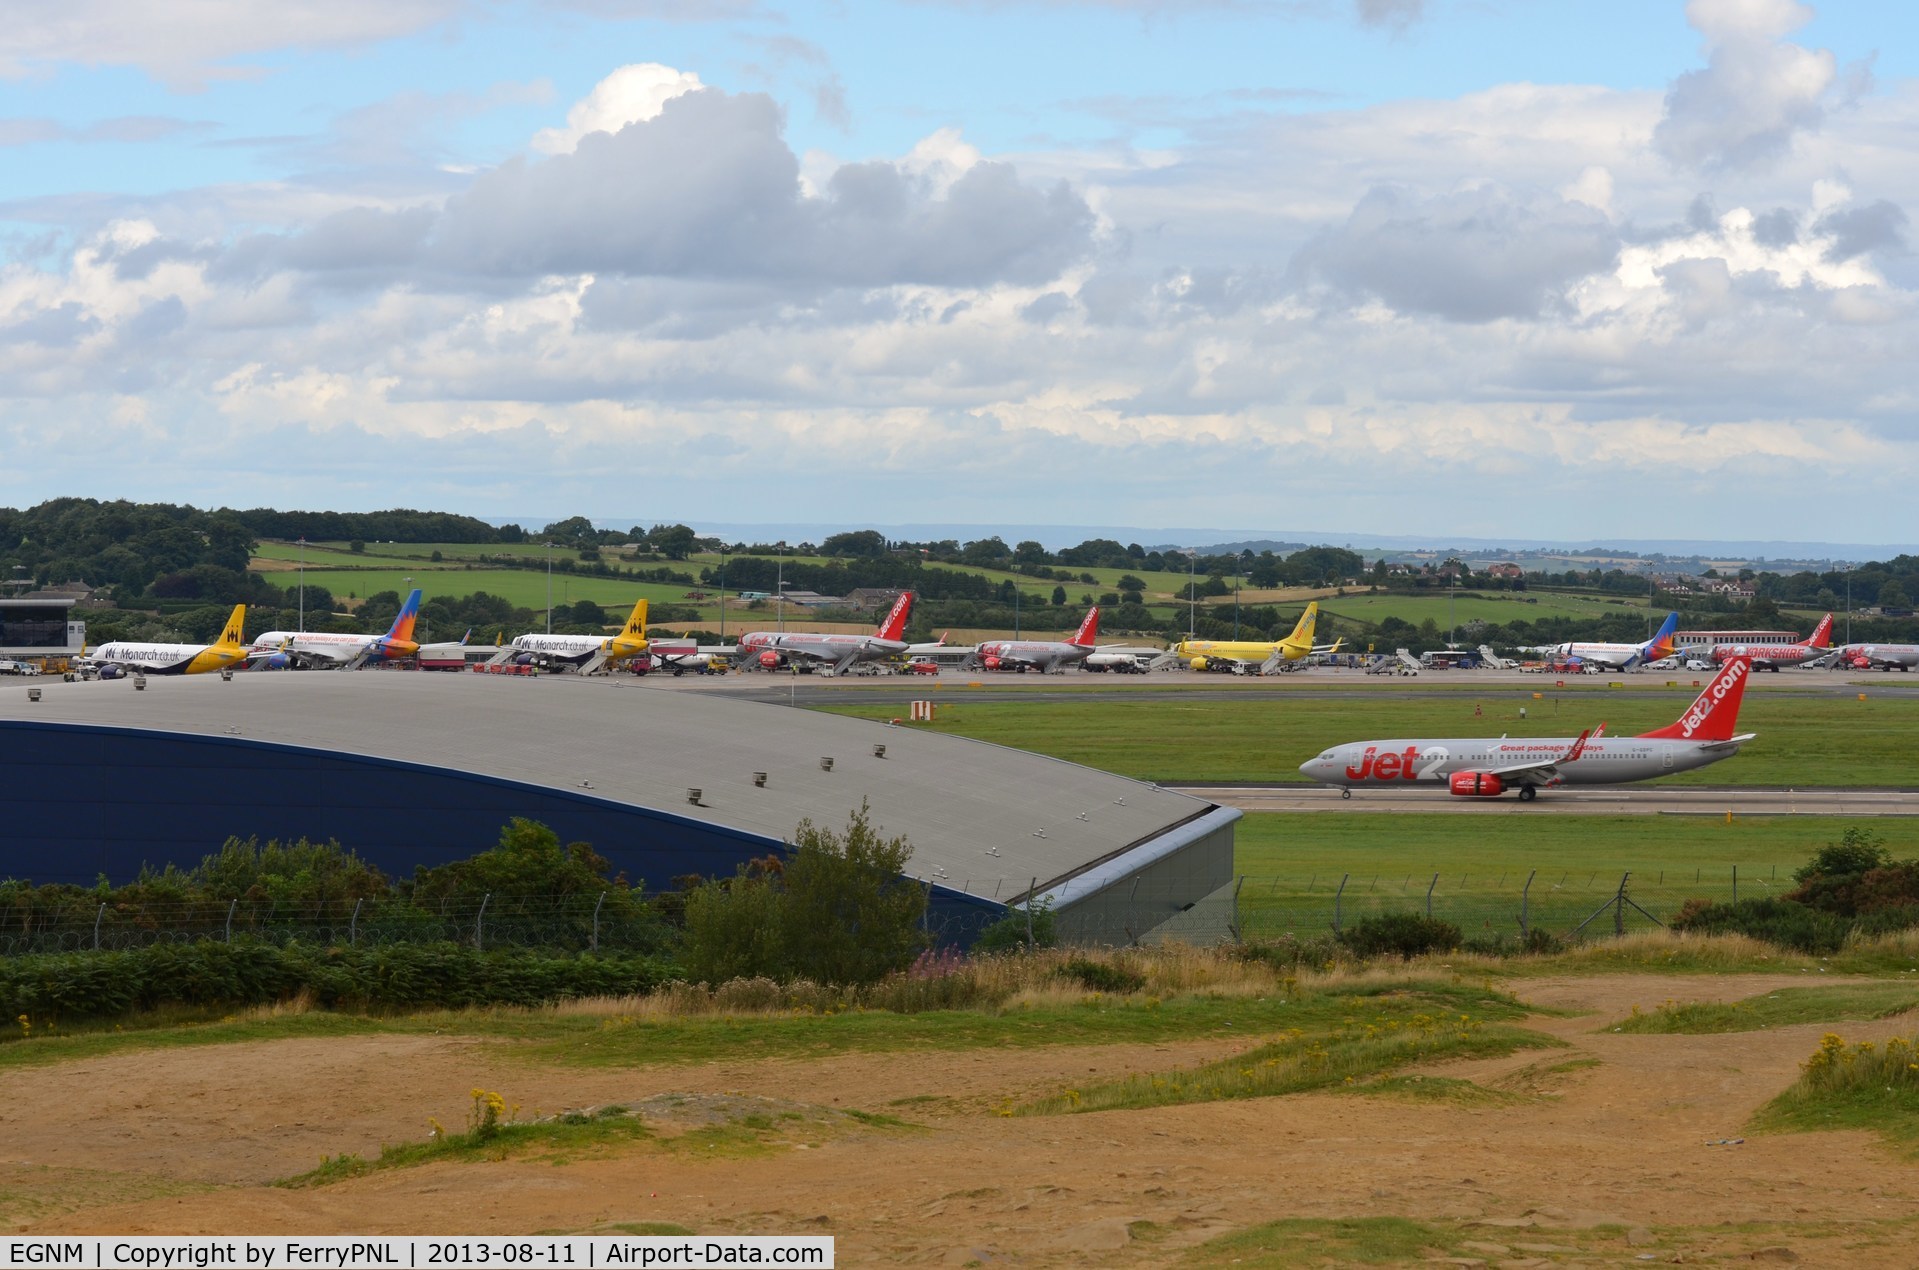 Leeds Bradford International Airport, West Yorkshire, England United Kingdom (EGNM) - Overview of LBA apron during sunday afternoon rush hour.